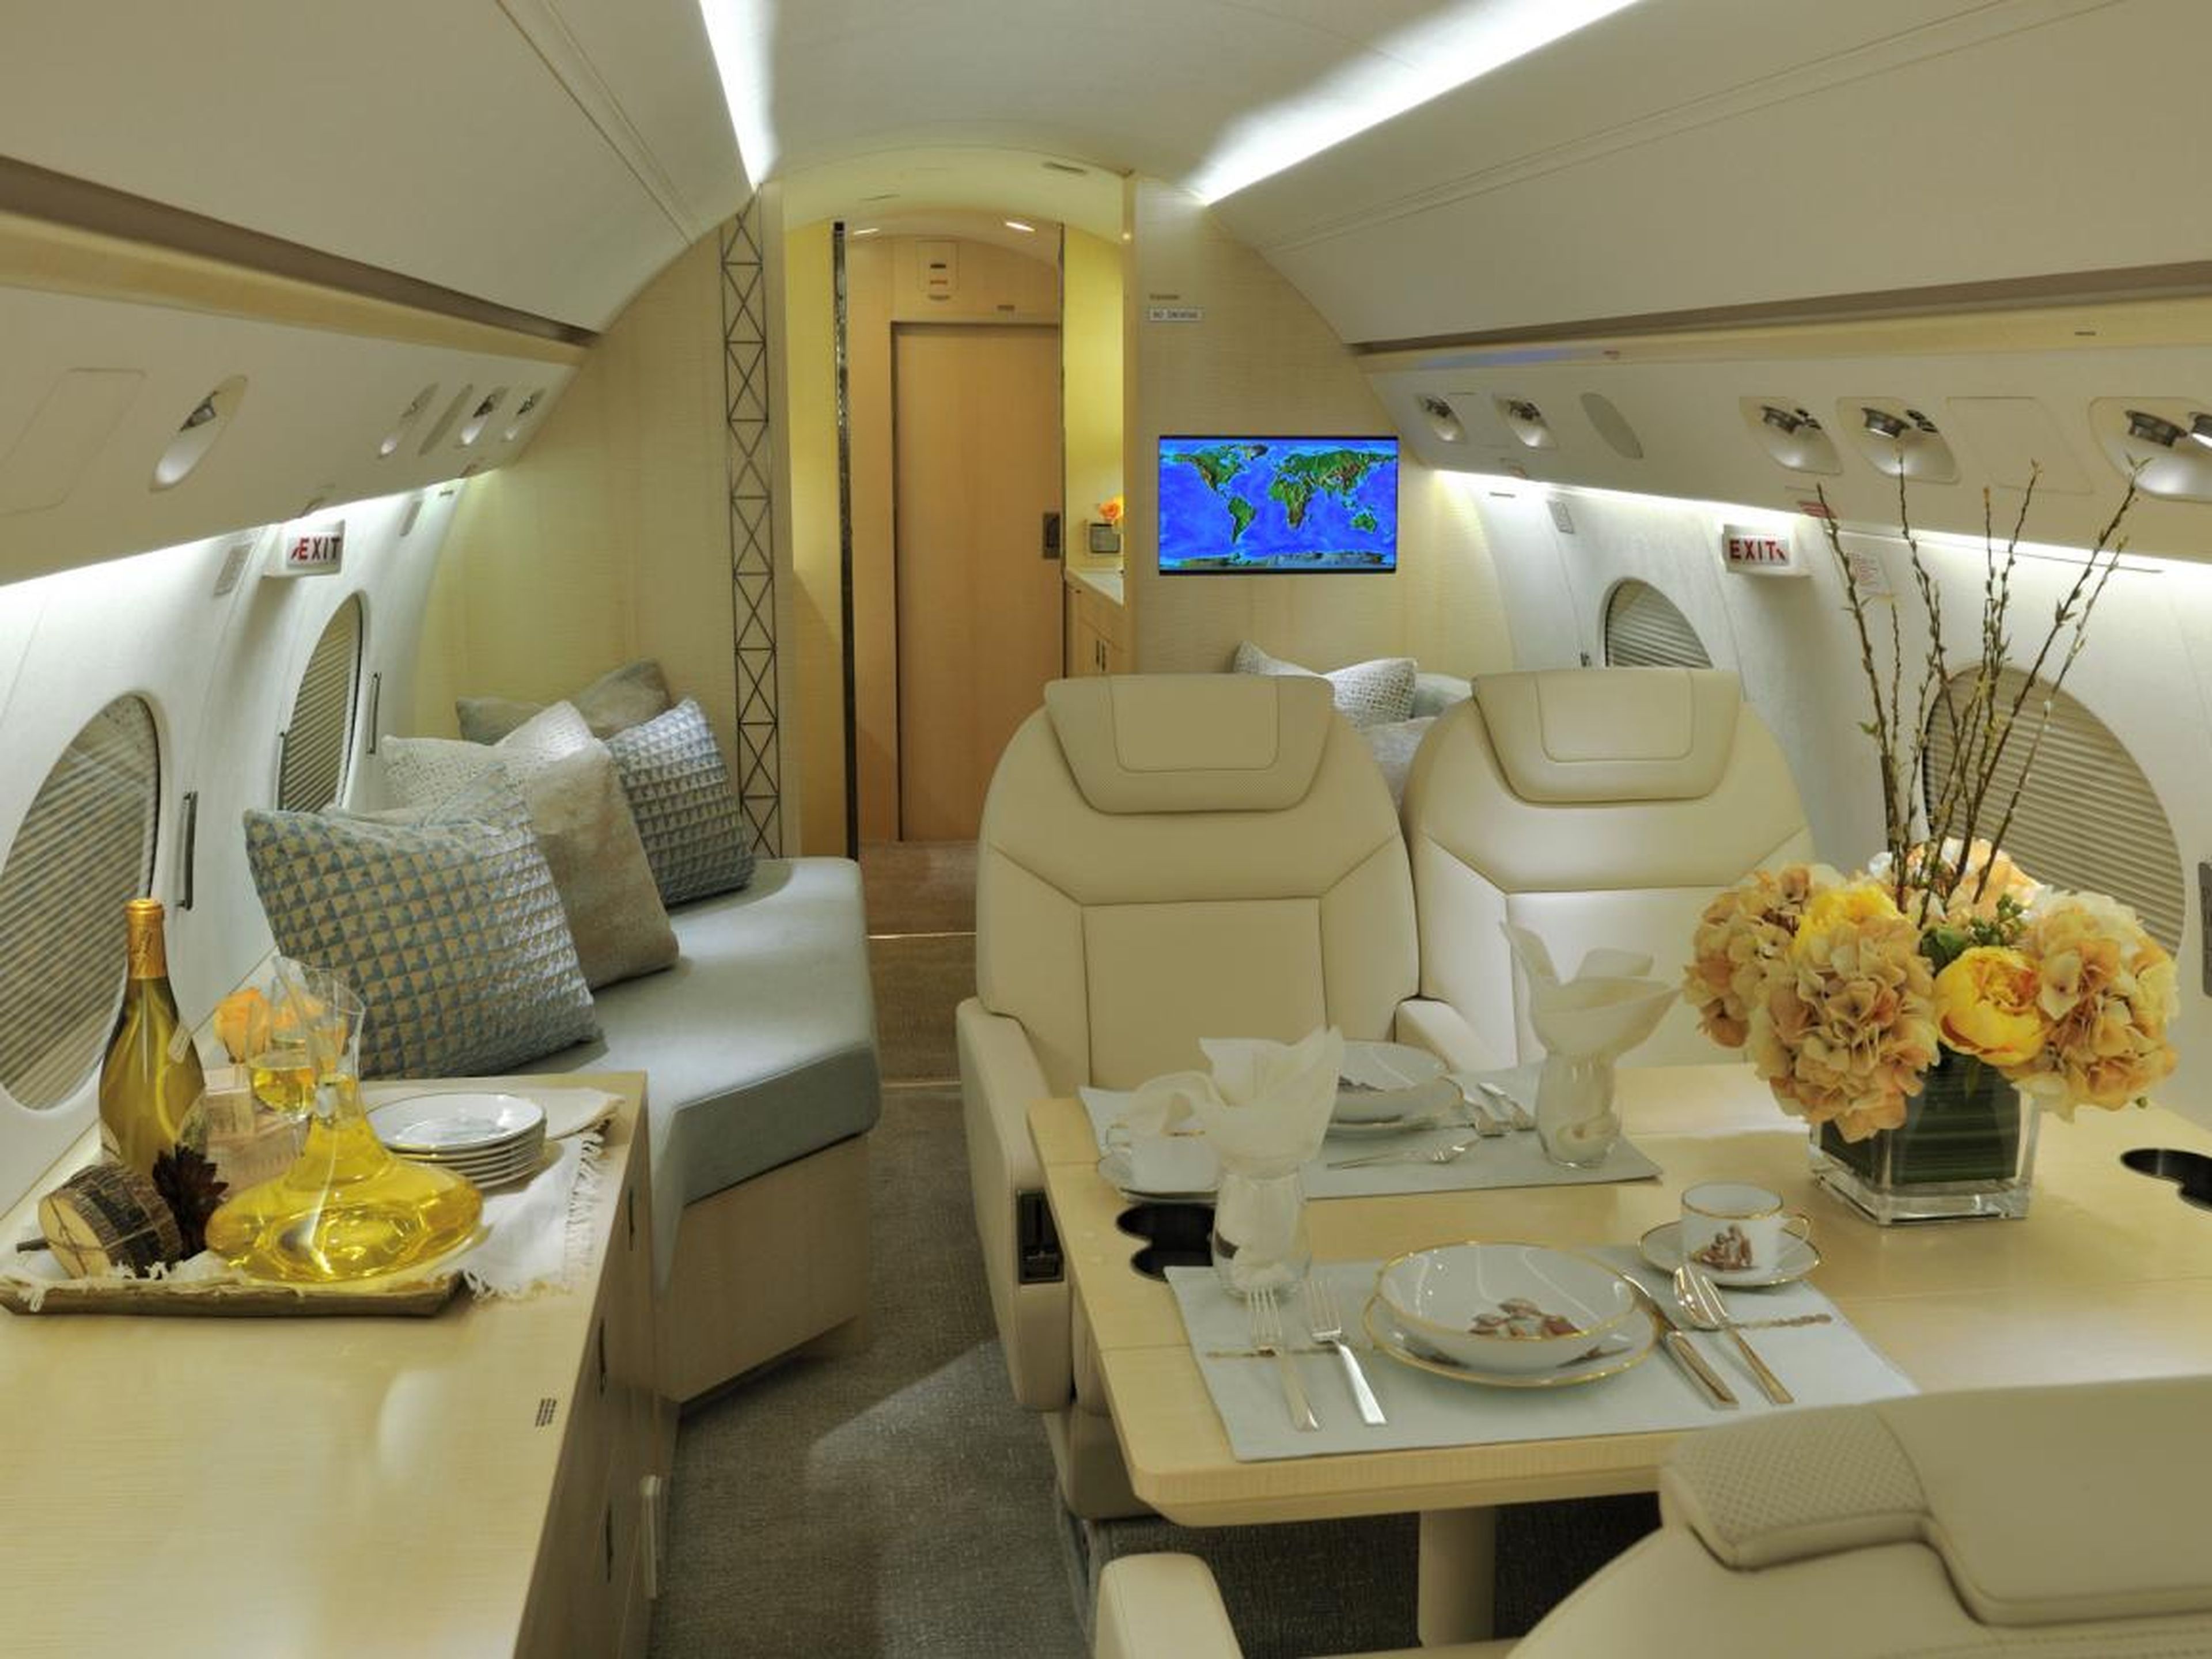 One major perk of flying private is that you get to decide what you want to eat, Roth said.